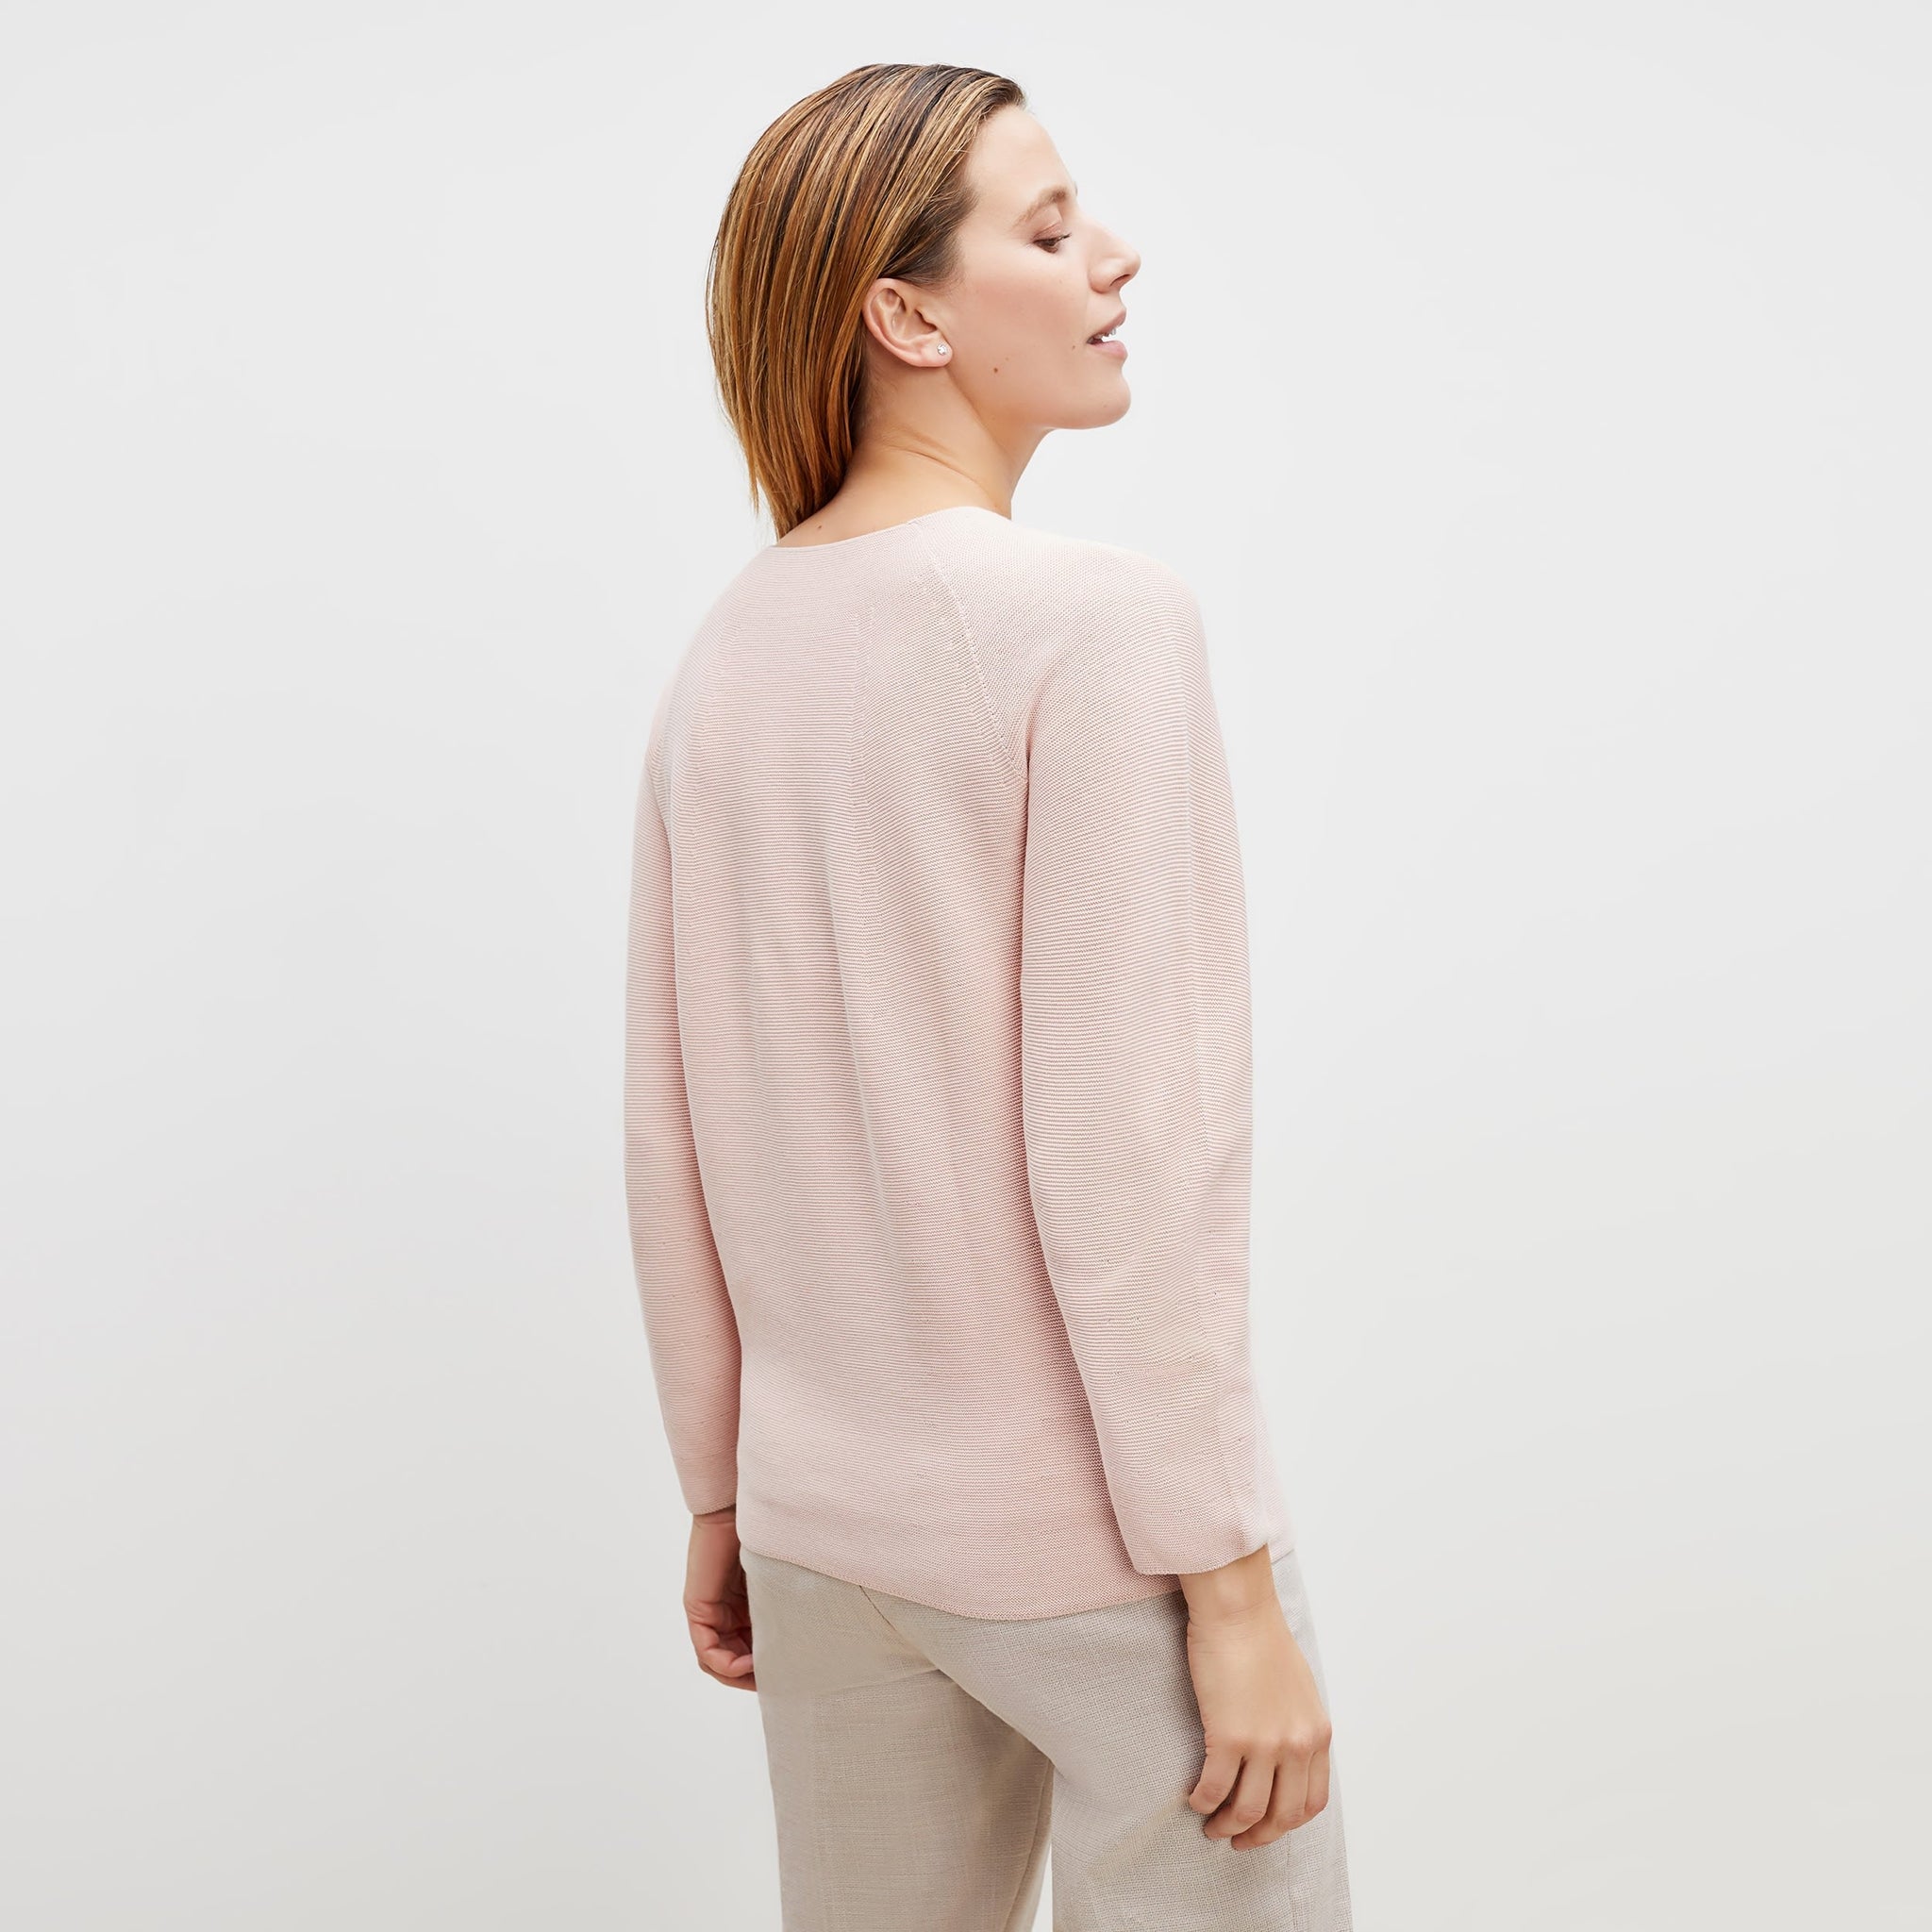 Back image of a woman standing wearing the chadwick top in peony